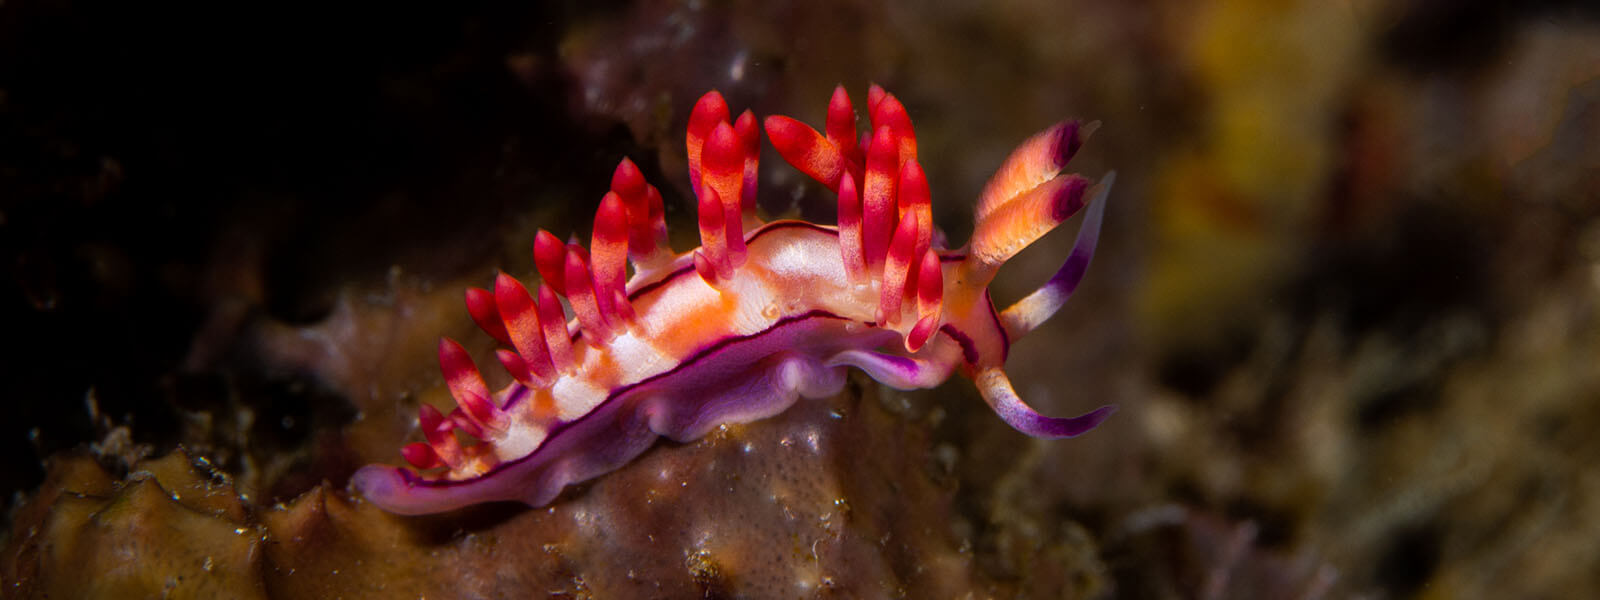 We see bizarre nudibranchs while snorkeling on our Alor, Indonesia snorkeling tour